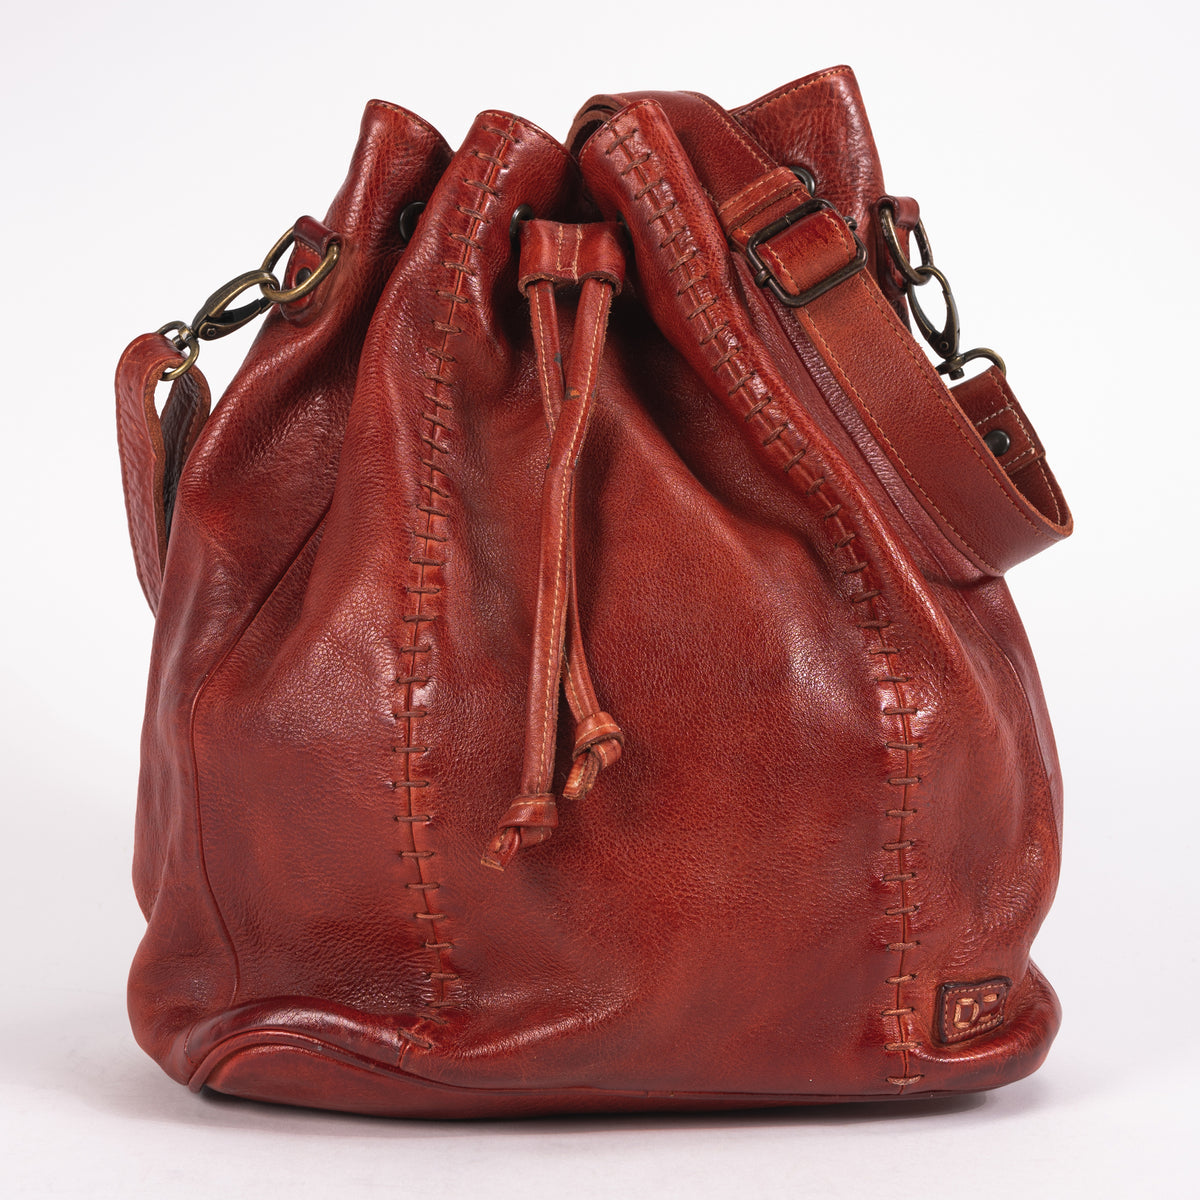 EVE - MONARCH RED - LEATHER